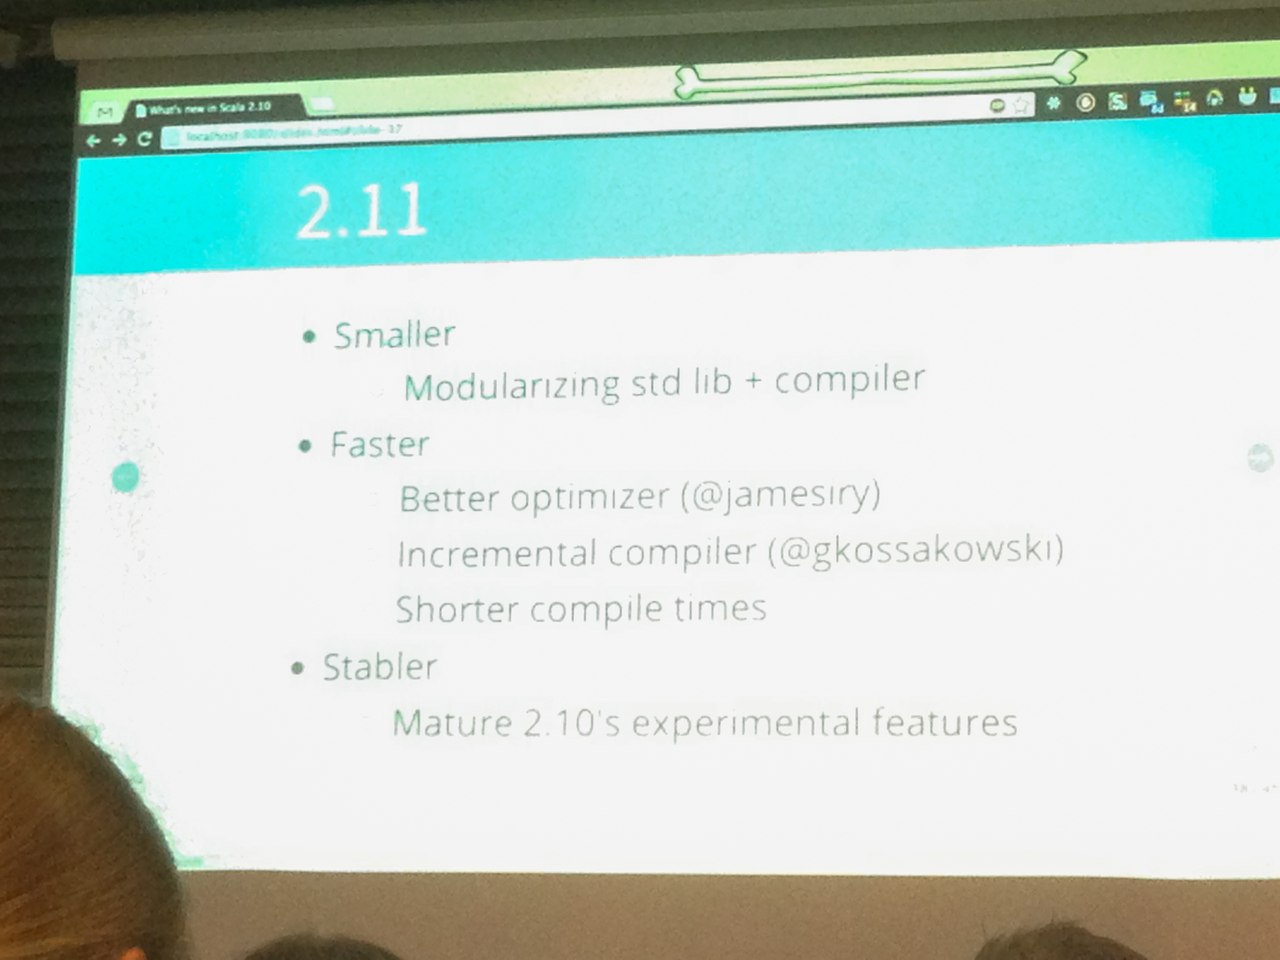 Scala 2.11 features